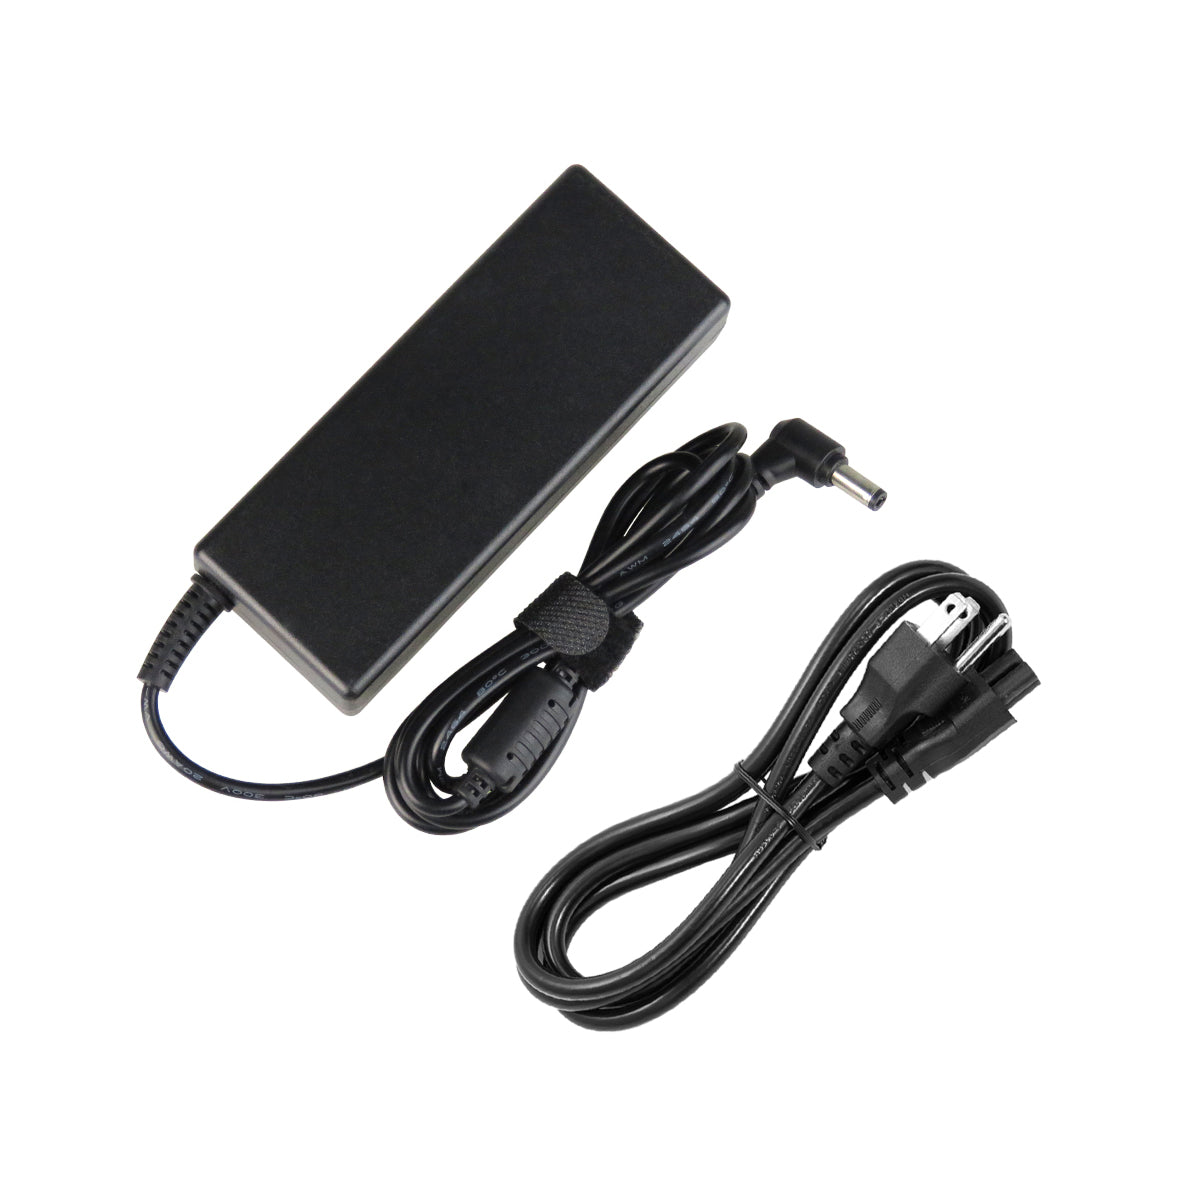 AC Adapter Charger for ASUS A8Je Notebook.